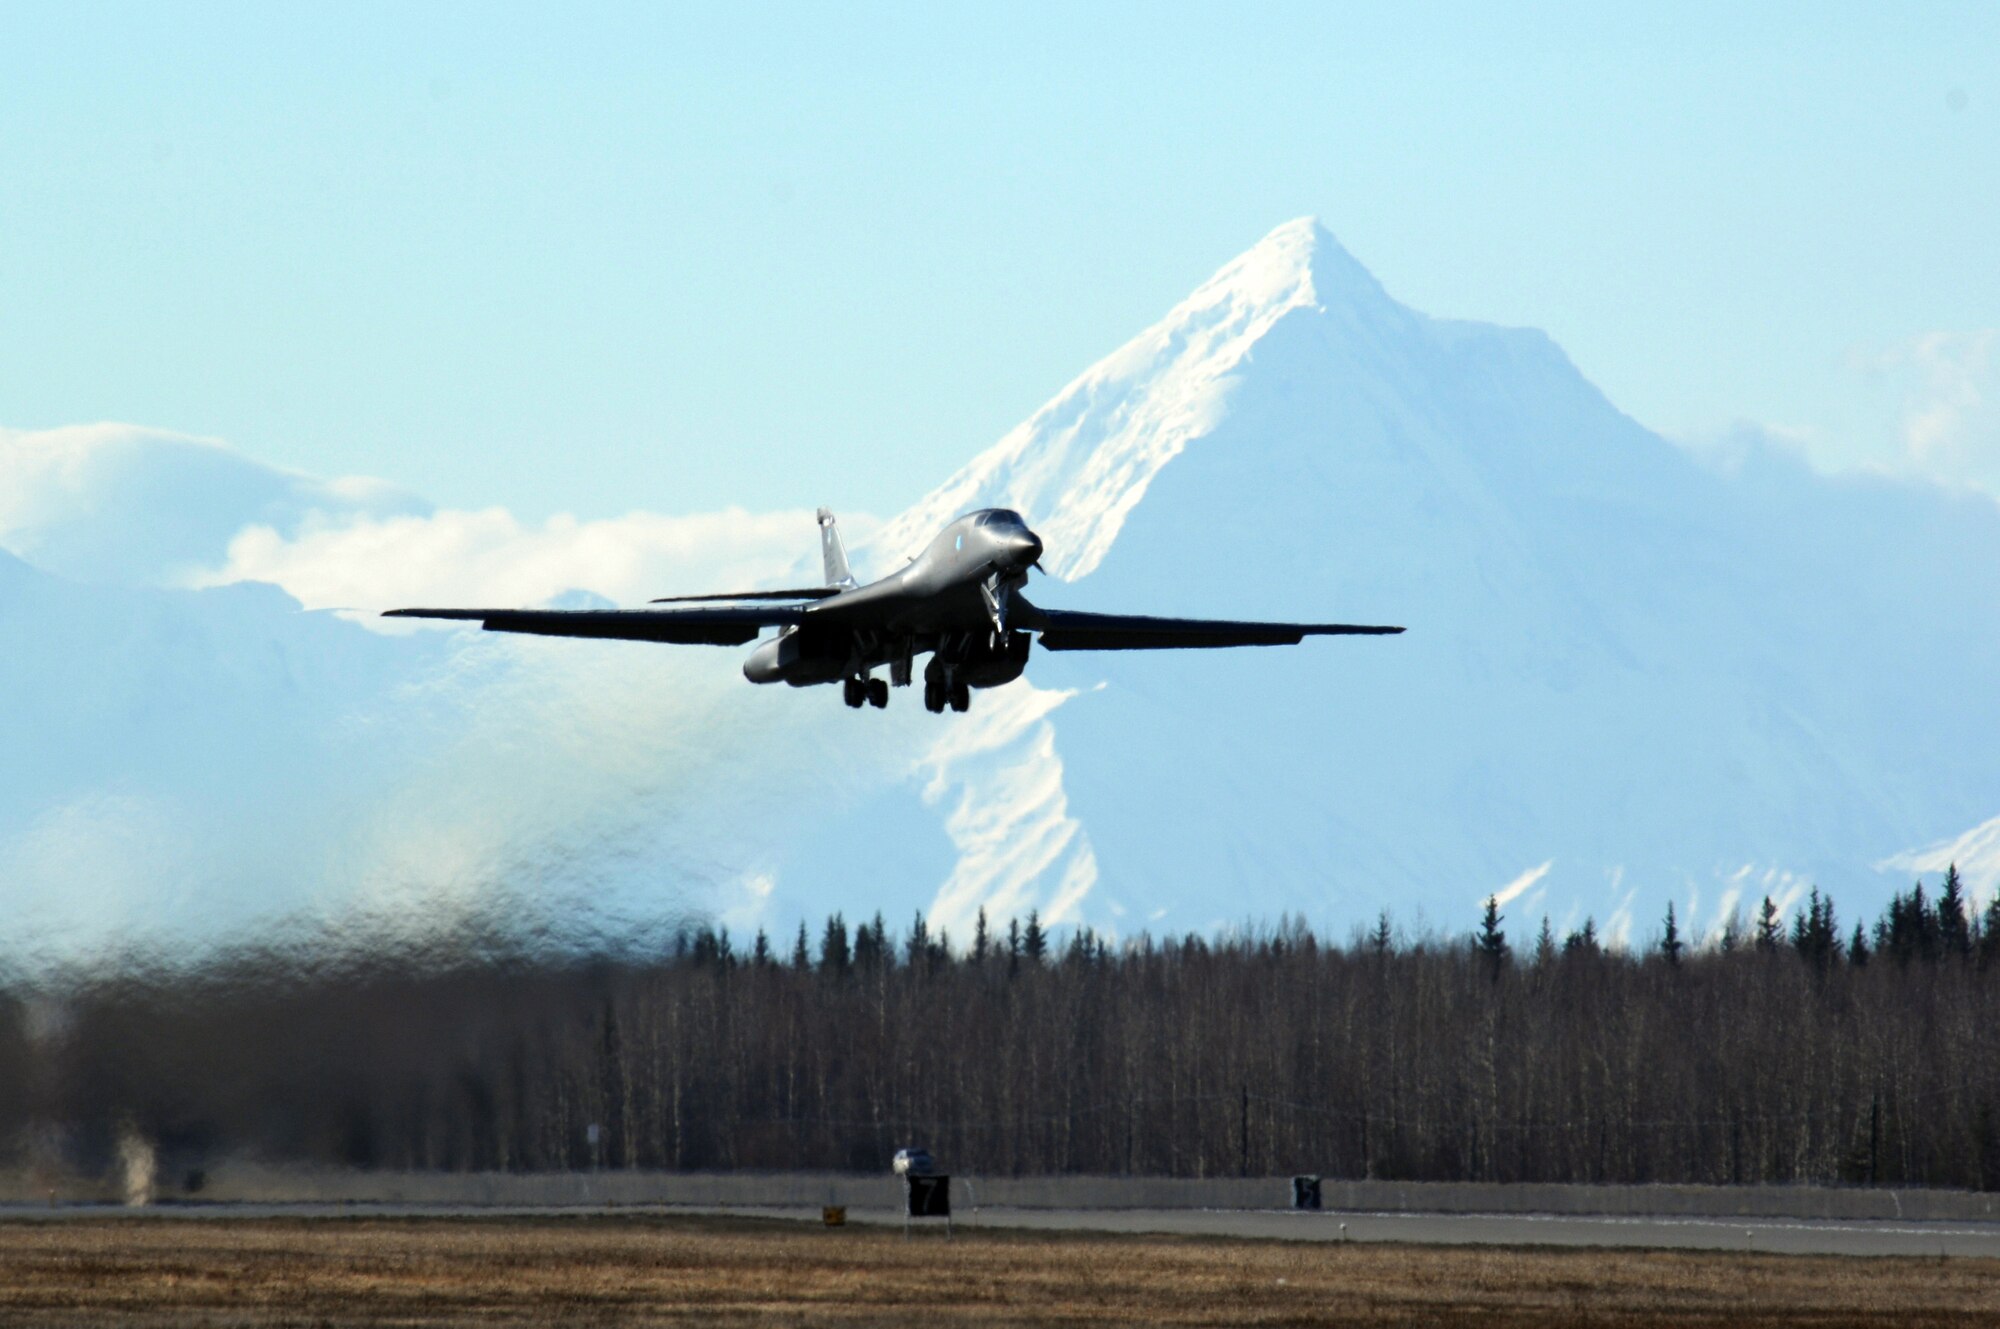 EIELSON AIR FORCE BASE, Alaska -- A B-1B Lancer from Ellsworth Air Force Base, South Dakota takes off for a mission during Red Flag-Alaska 07-1. Red Flag-Alaska is a Pacific Air Forces-directed field training exercise for U.S. forces flown under simulated air combat conditions. It is conducted on the Pacific Alaskan Range Complex with air operations flown out of Eielson and Elmendorf Air Force Bases. (U.S. Air Force Photo by Staff Sgt Joshua Strang)